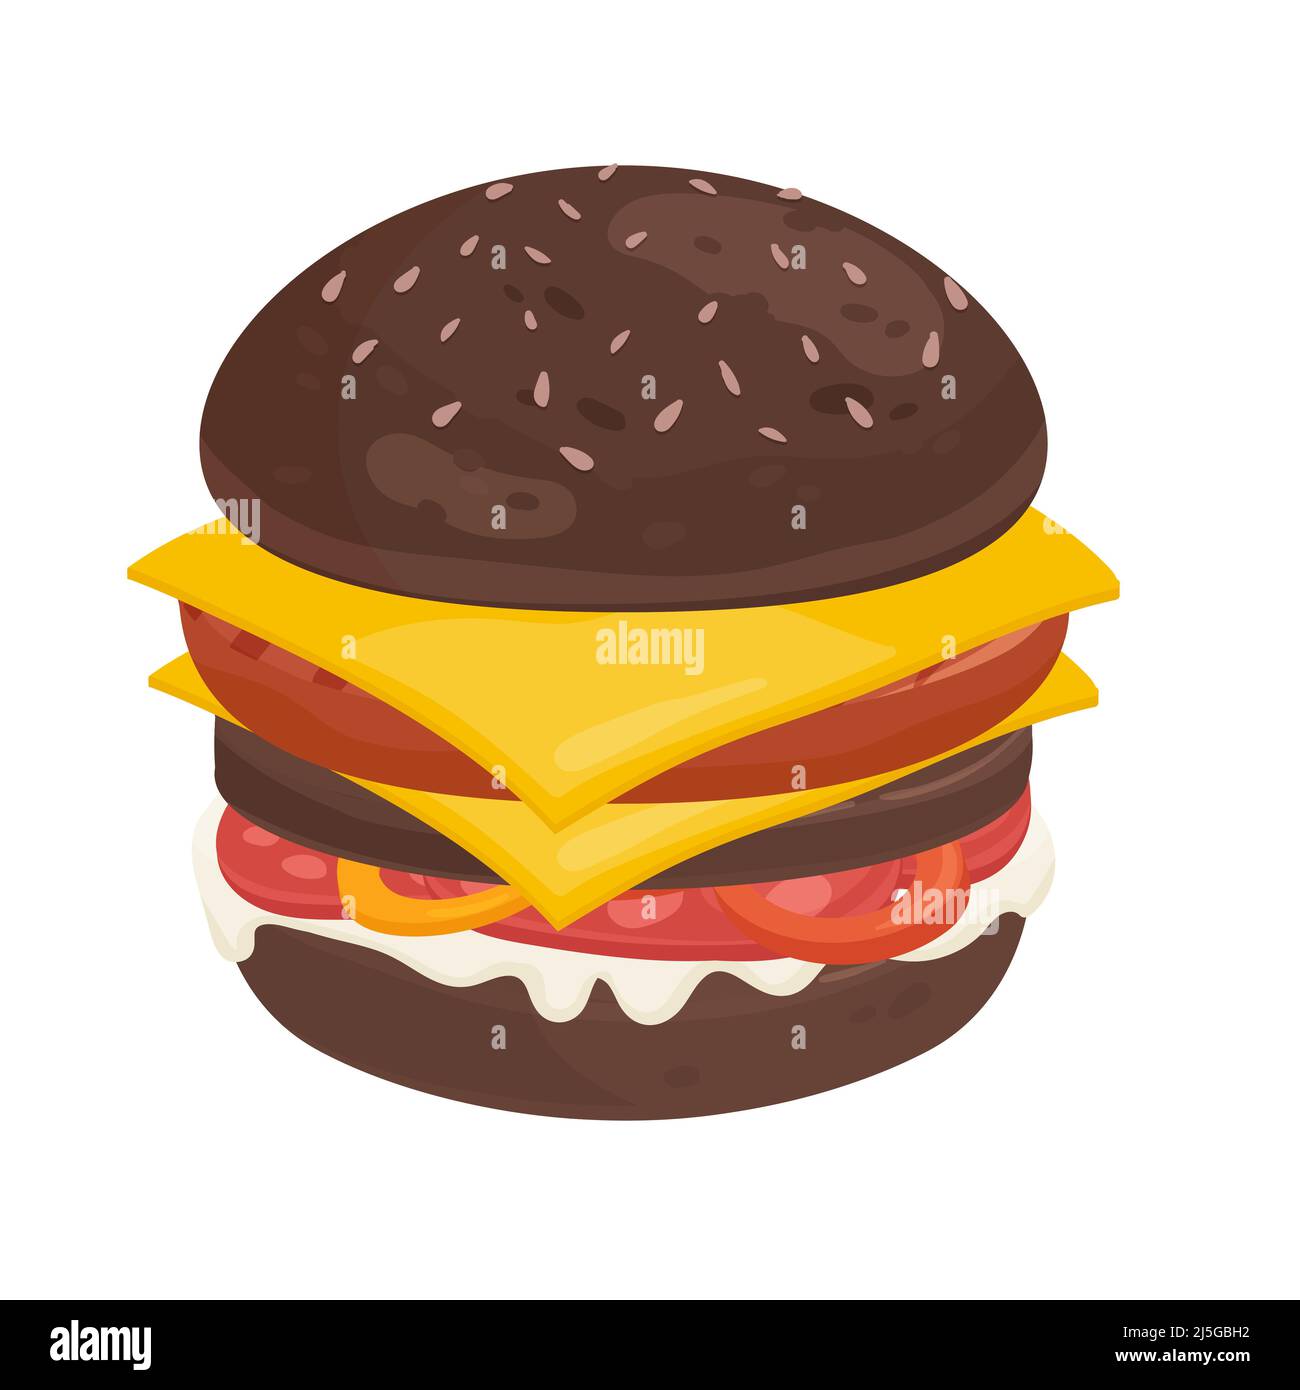 Huge delicious grilled burger with dark buns. Fresh fast food takeaway meal cartoon vector illustration Stock Vector